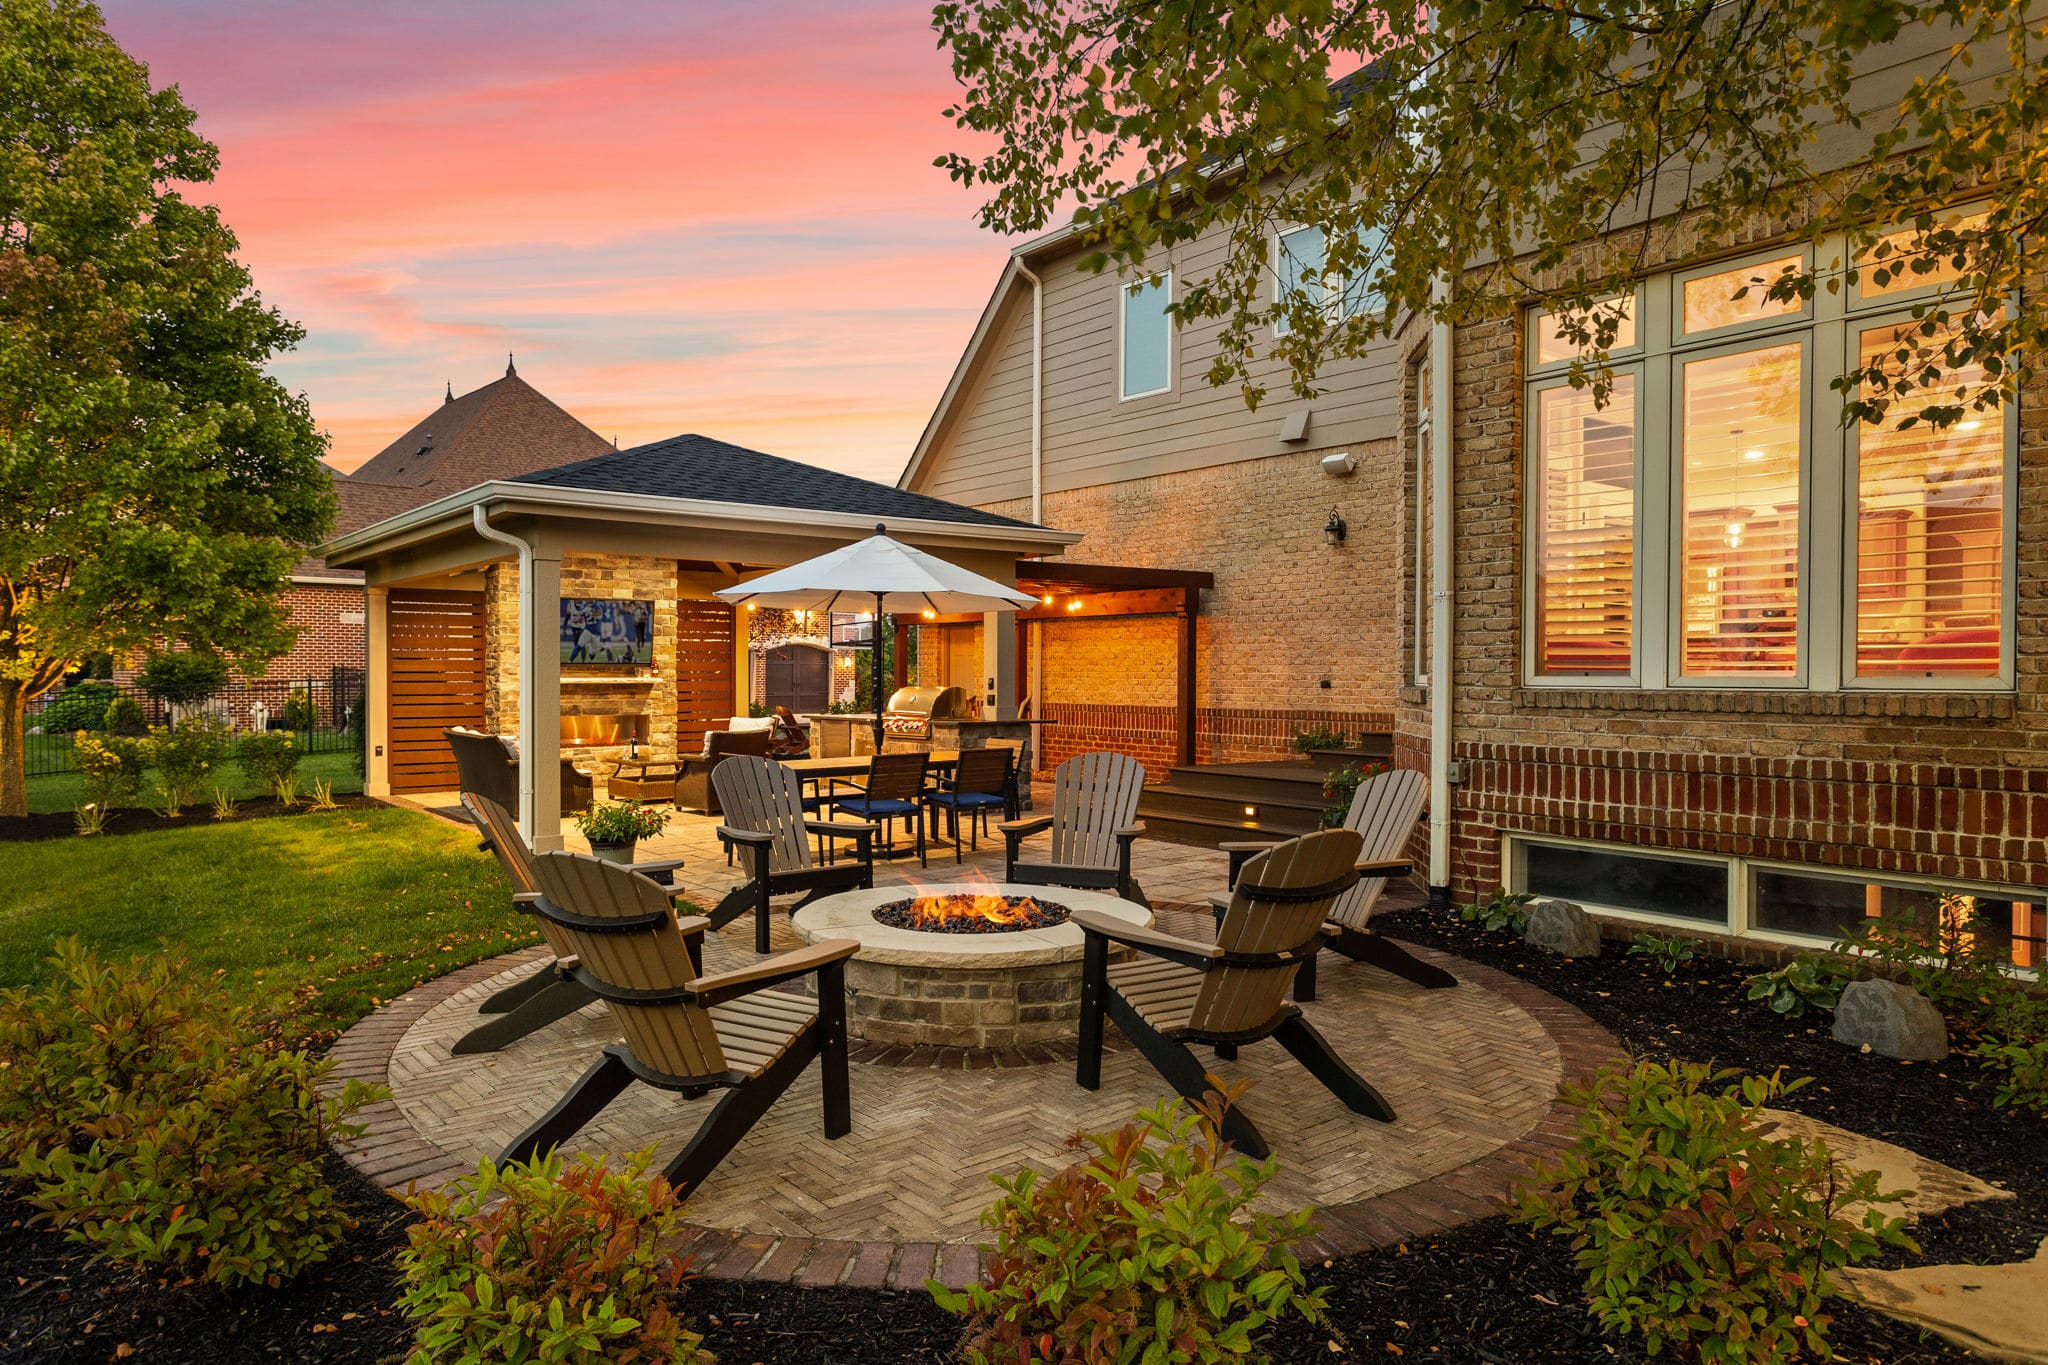 Custom Outdoor Living Space in Fishers Indiana With Landscape Design and Hardscape Design